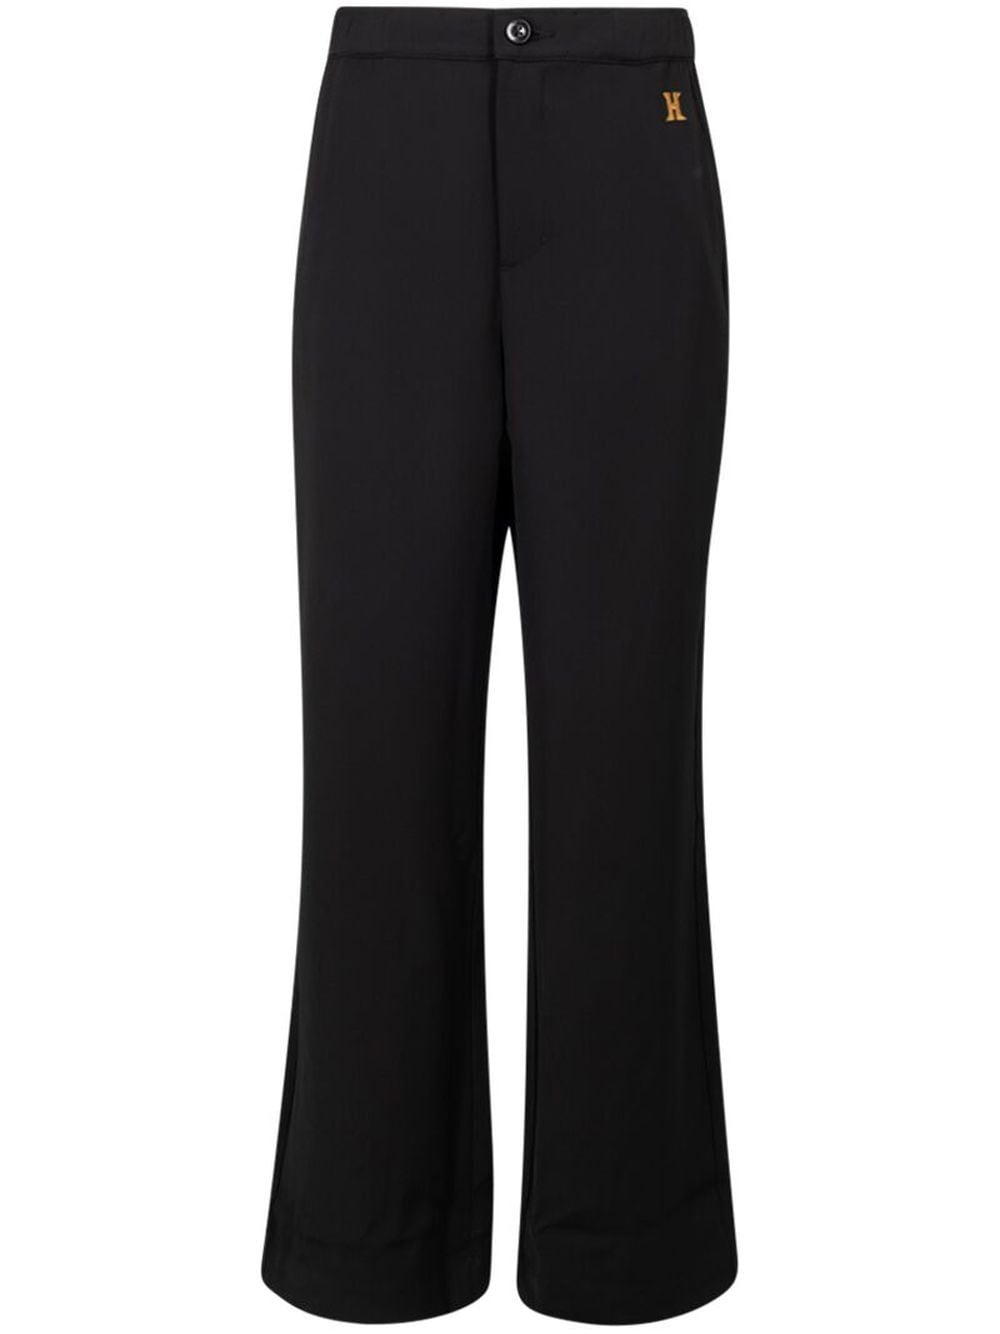 Bell high-waisted trousers